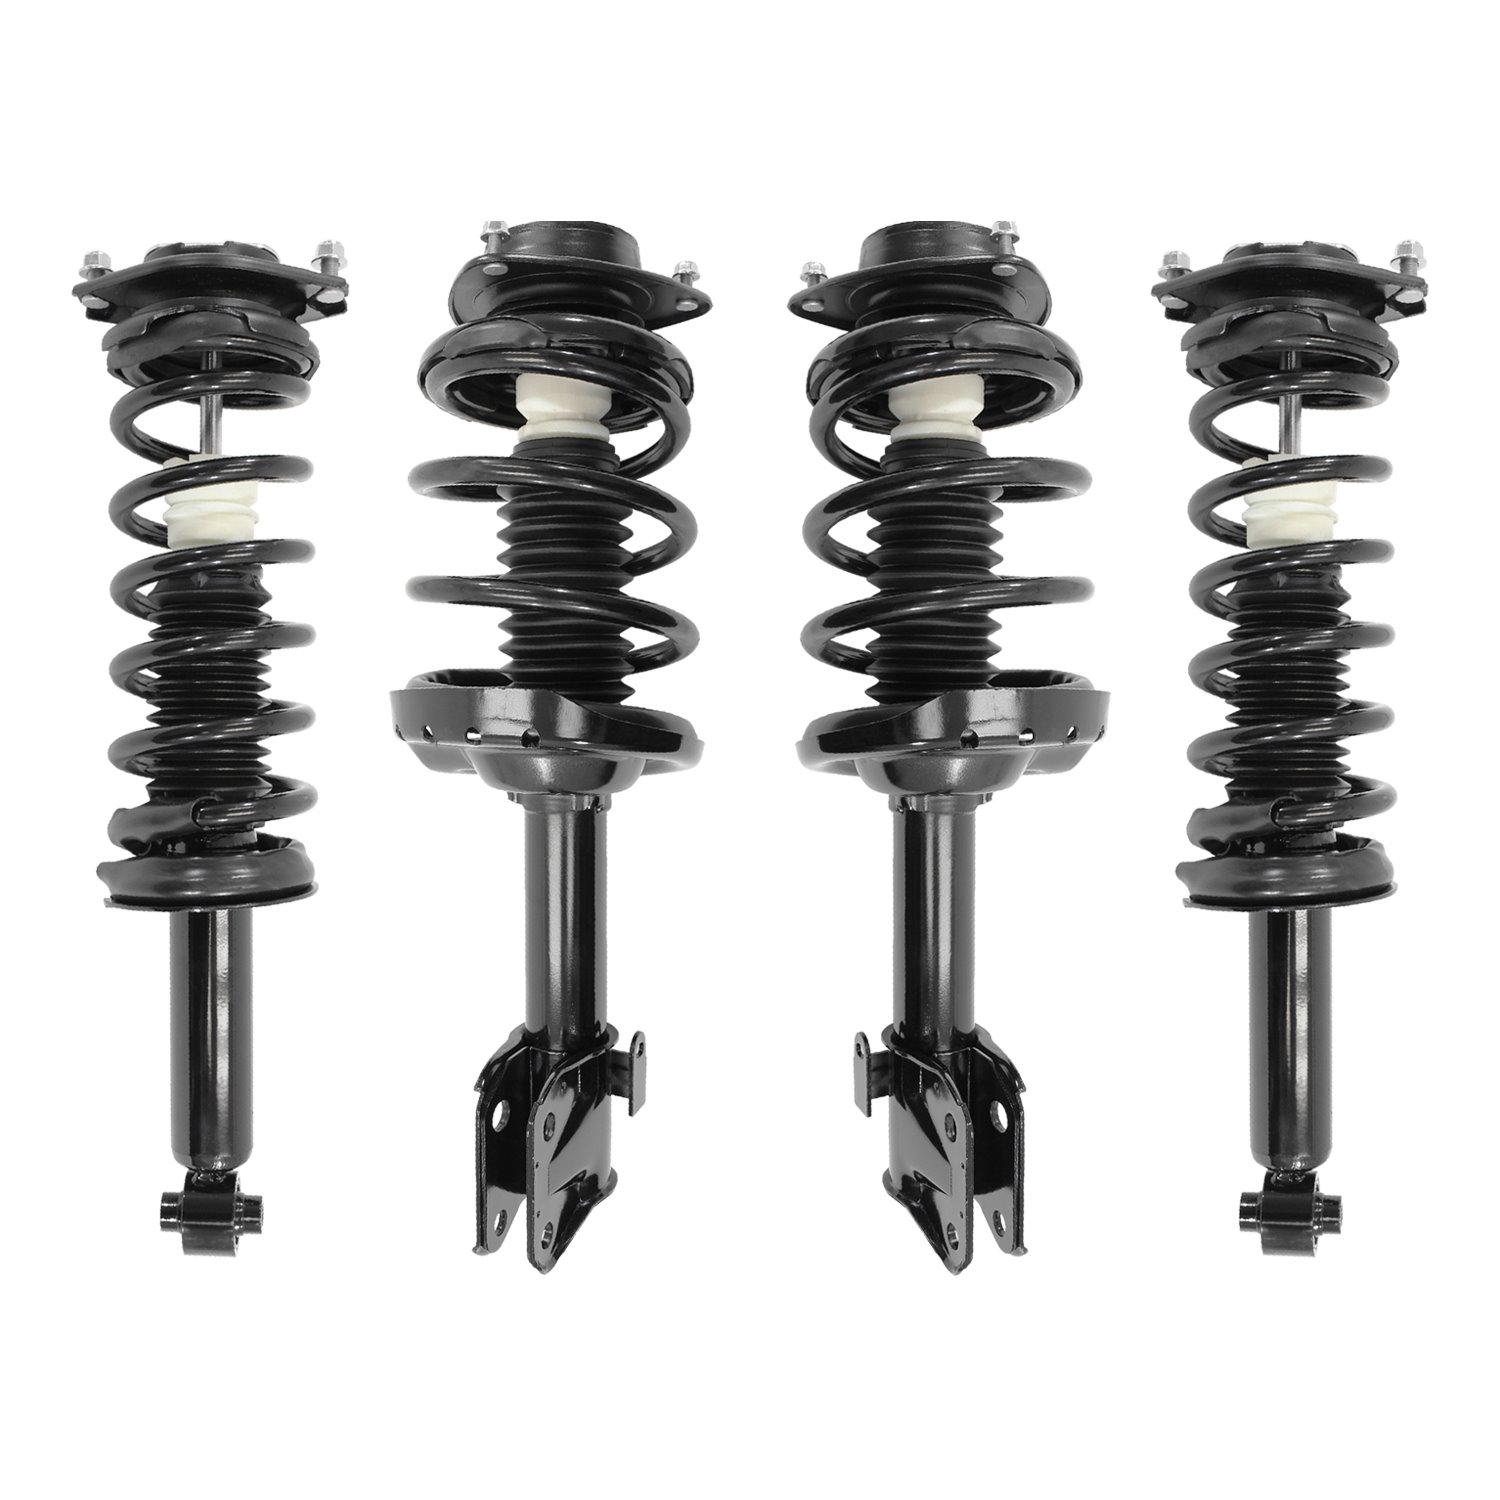 4-11917-16100-001 Front & Rear Suspension Strut & Coil Spring Assembly Kit Fits Select Subaru Forester